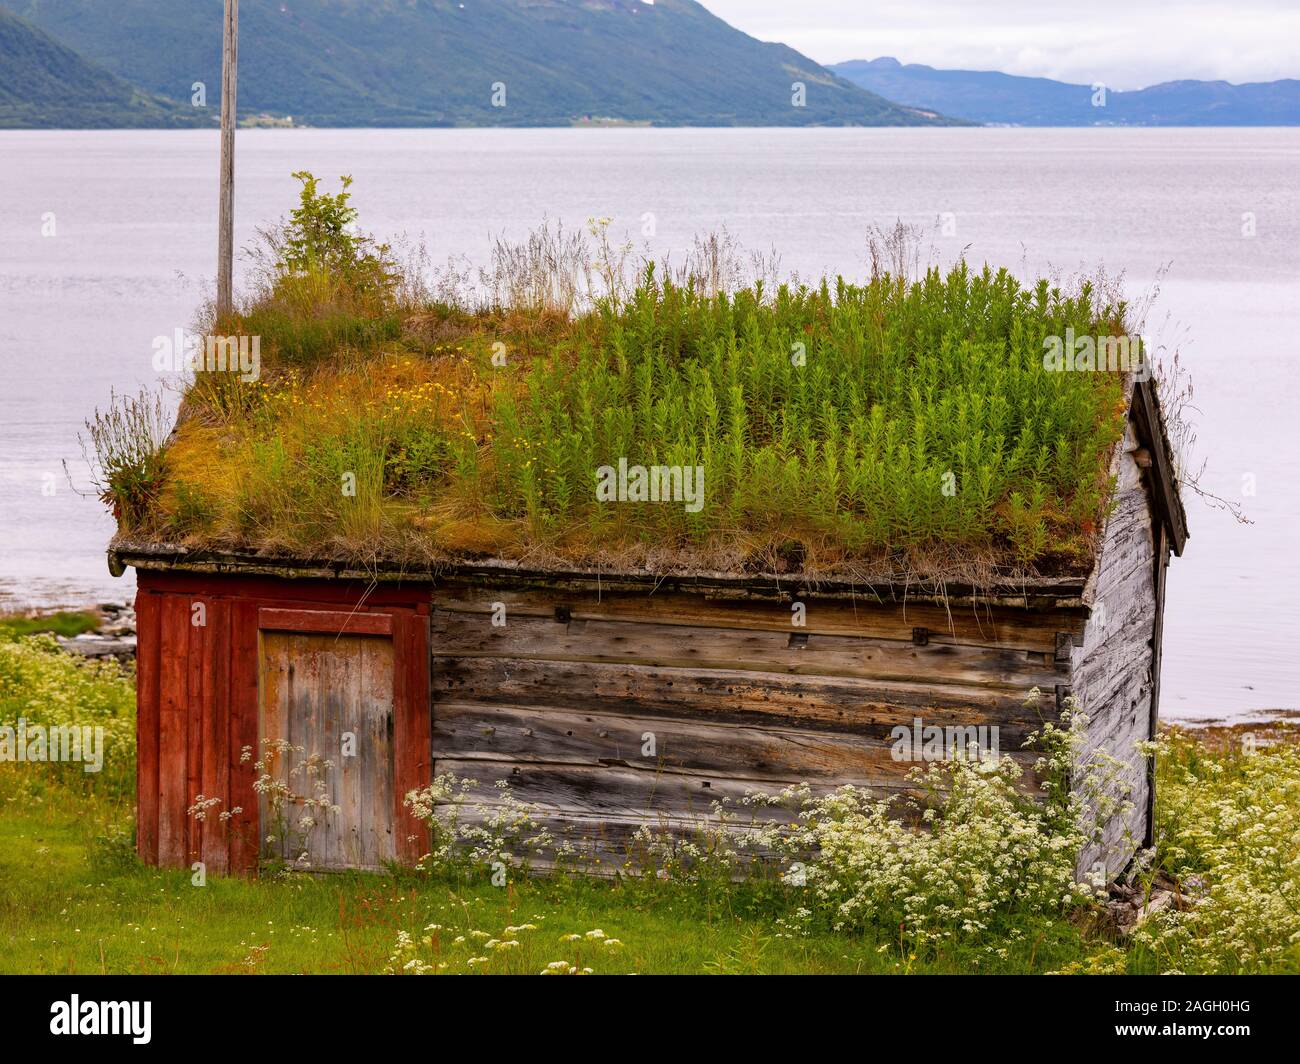 STRAUMSBUKTA, KVALØYA ISLAND, TROMS COUNTY, NORWAY - Historic museum village of Straumen Gård with turf roof buildings. Sod roof is traditional. Stock Photo